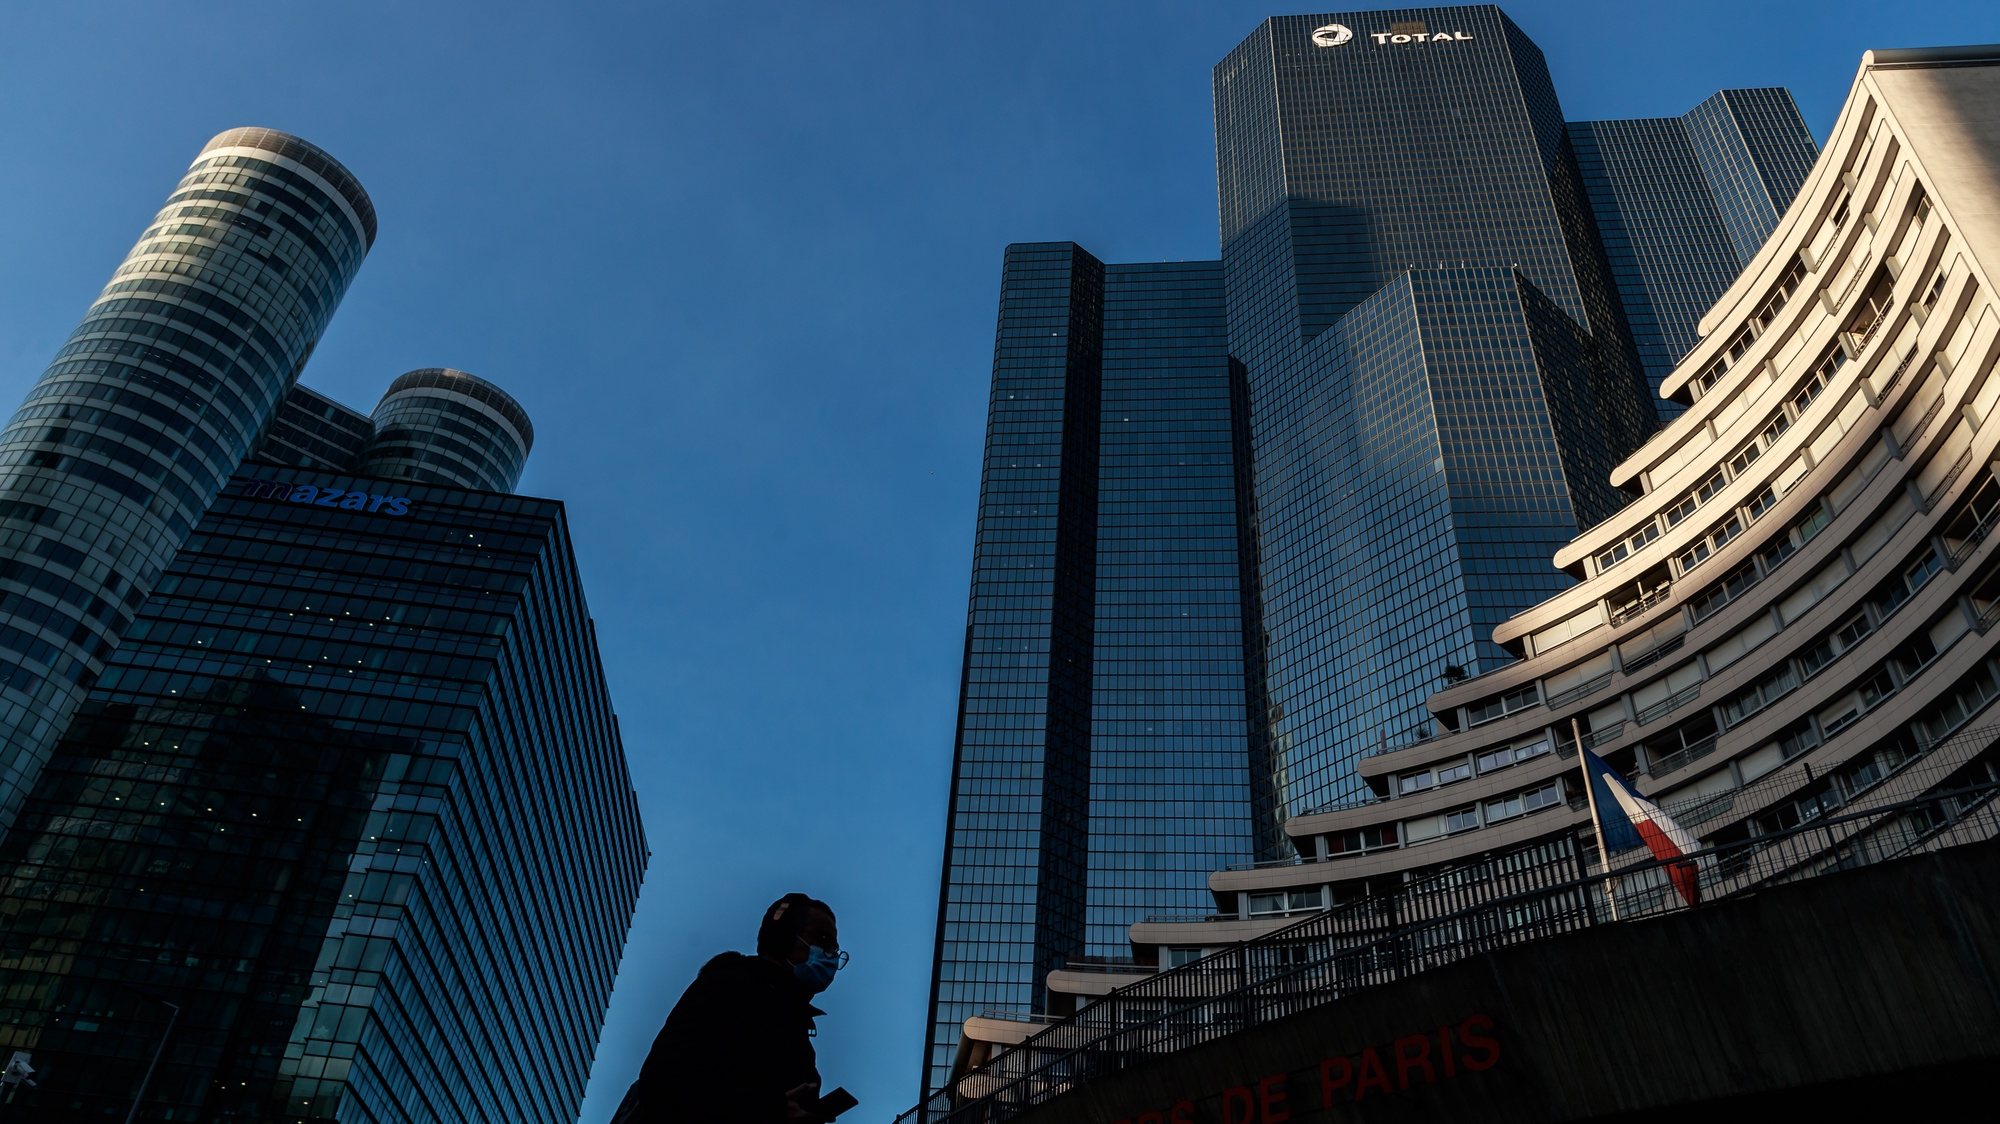 epa08966202 An exterior view of the headquarter of the French oil firm Total, in La Defense, Paris business district, France, 26 January 2021. Total plans to close its Grandpuits refinery and reassigning its workers to bio-fuel production.  EPA/CHRISTOPHE PETIT TESSON